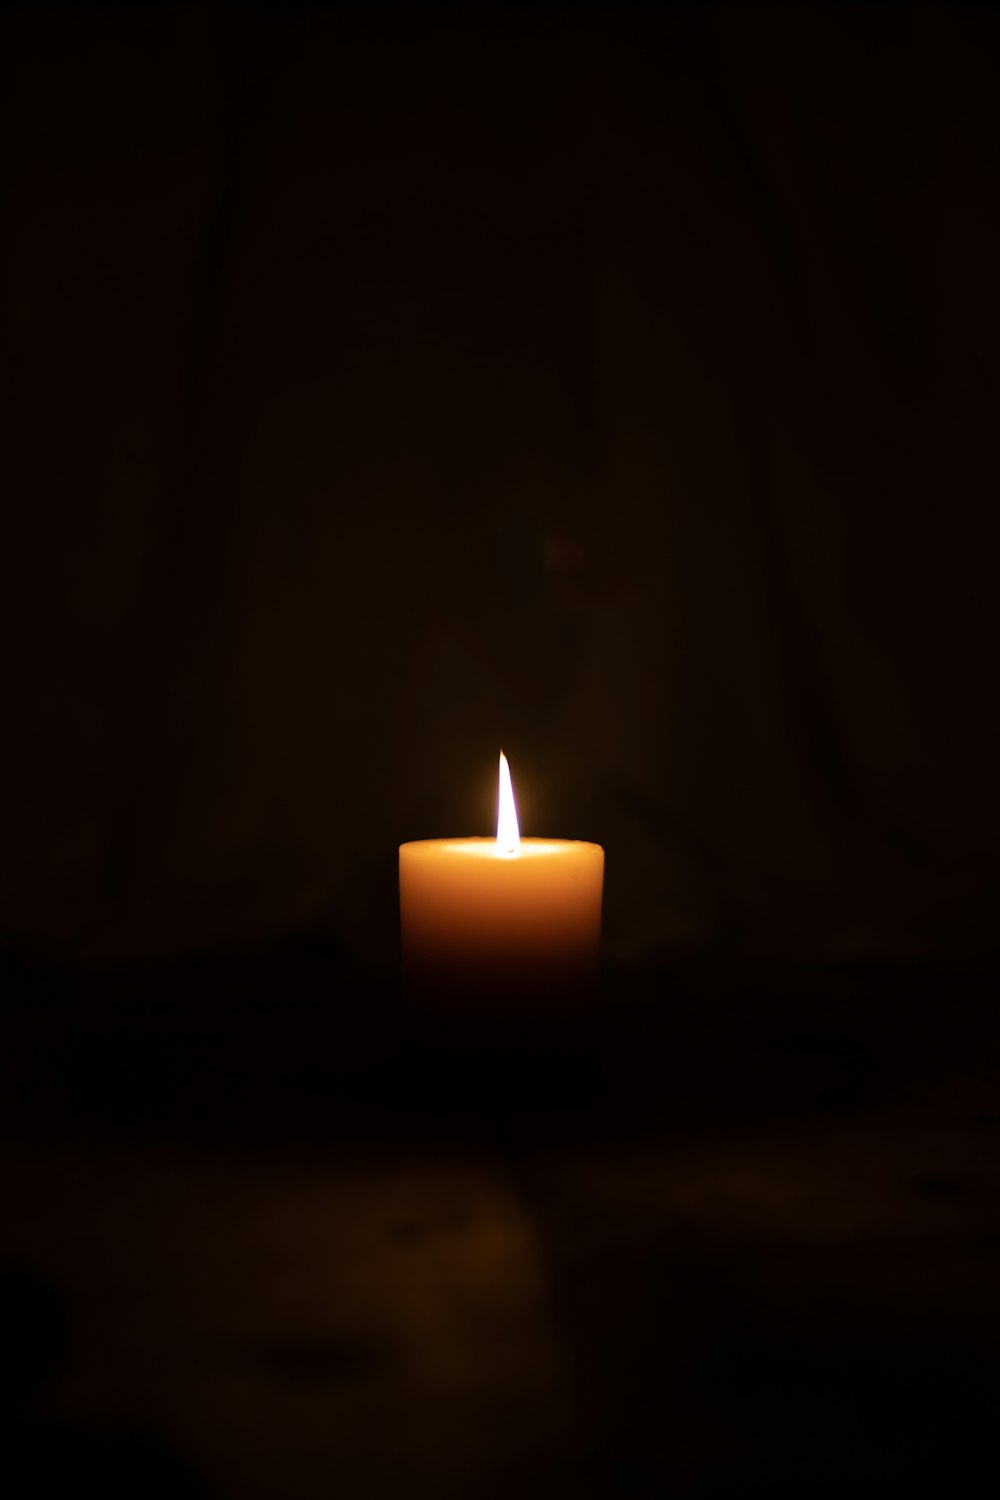 Burning Candle Pictures | Download Free Images on Unsplash